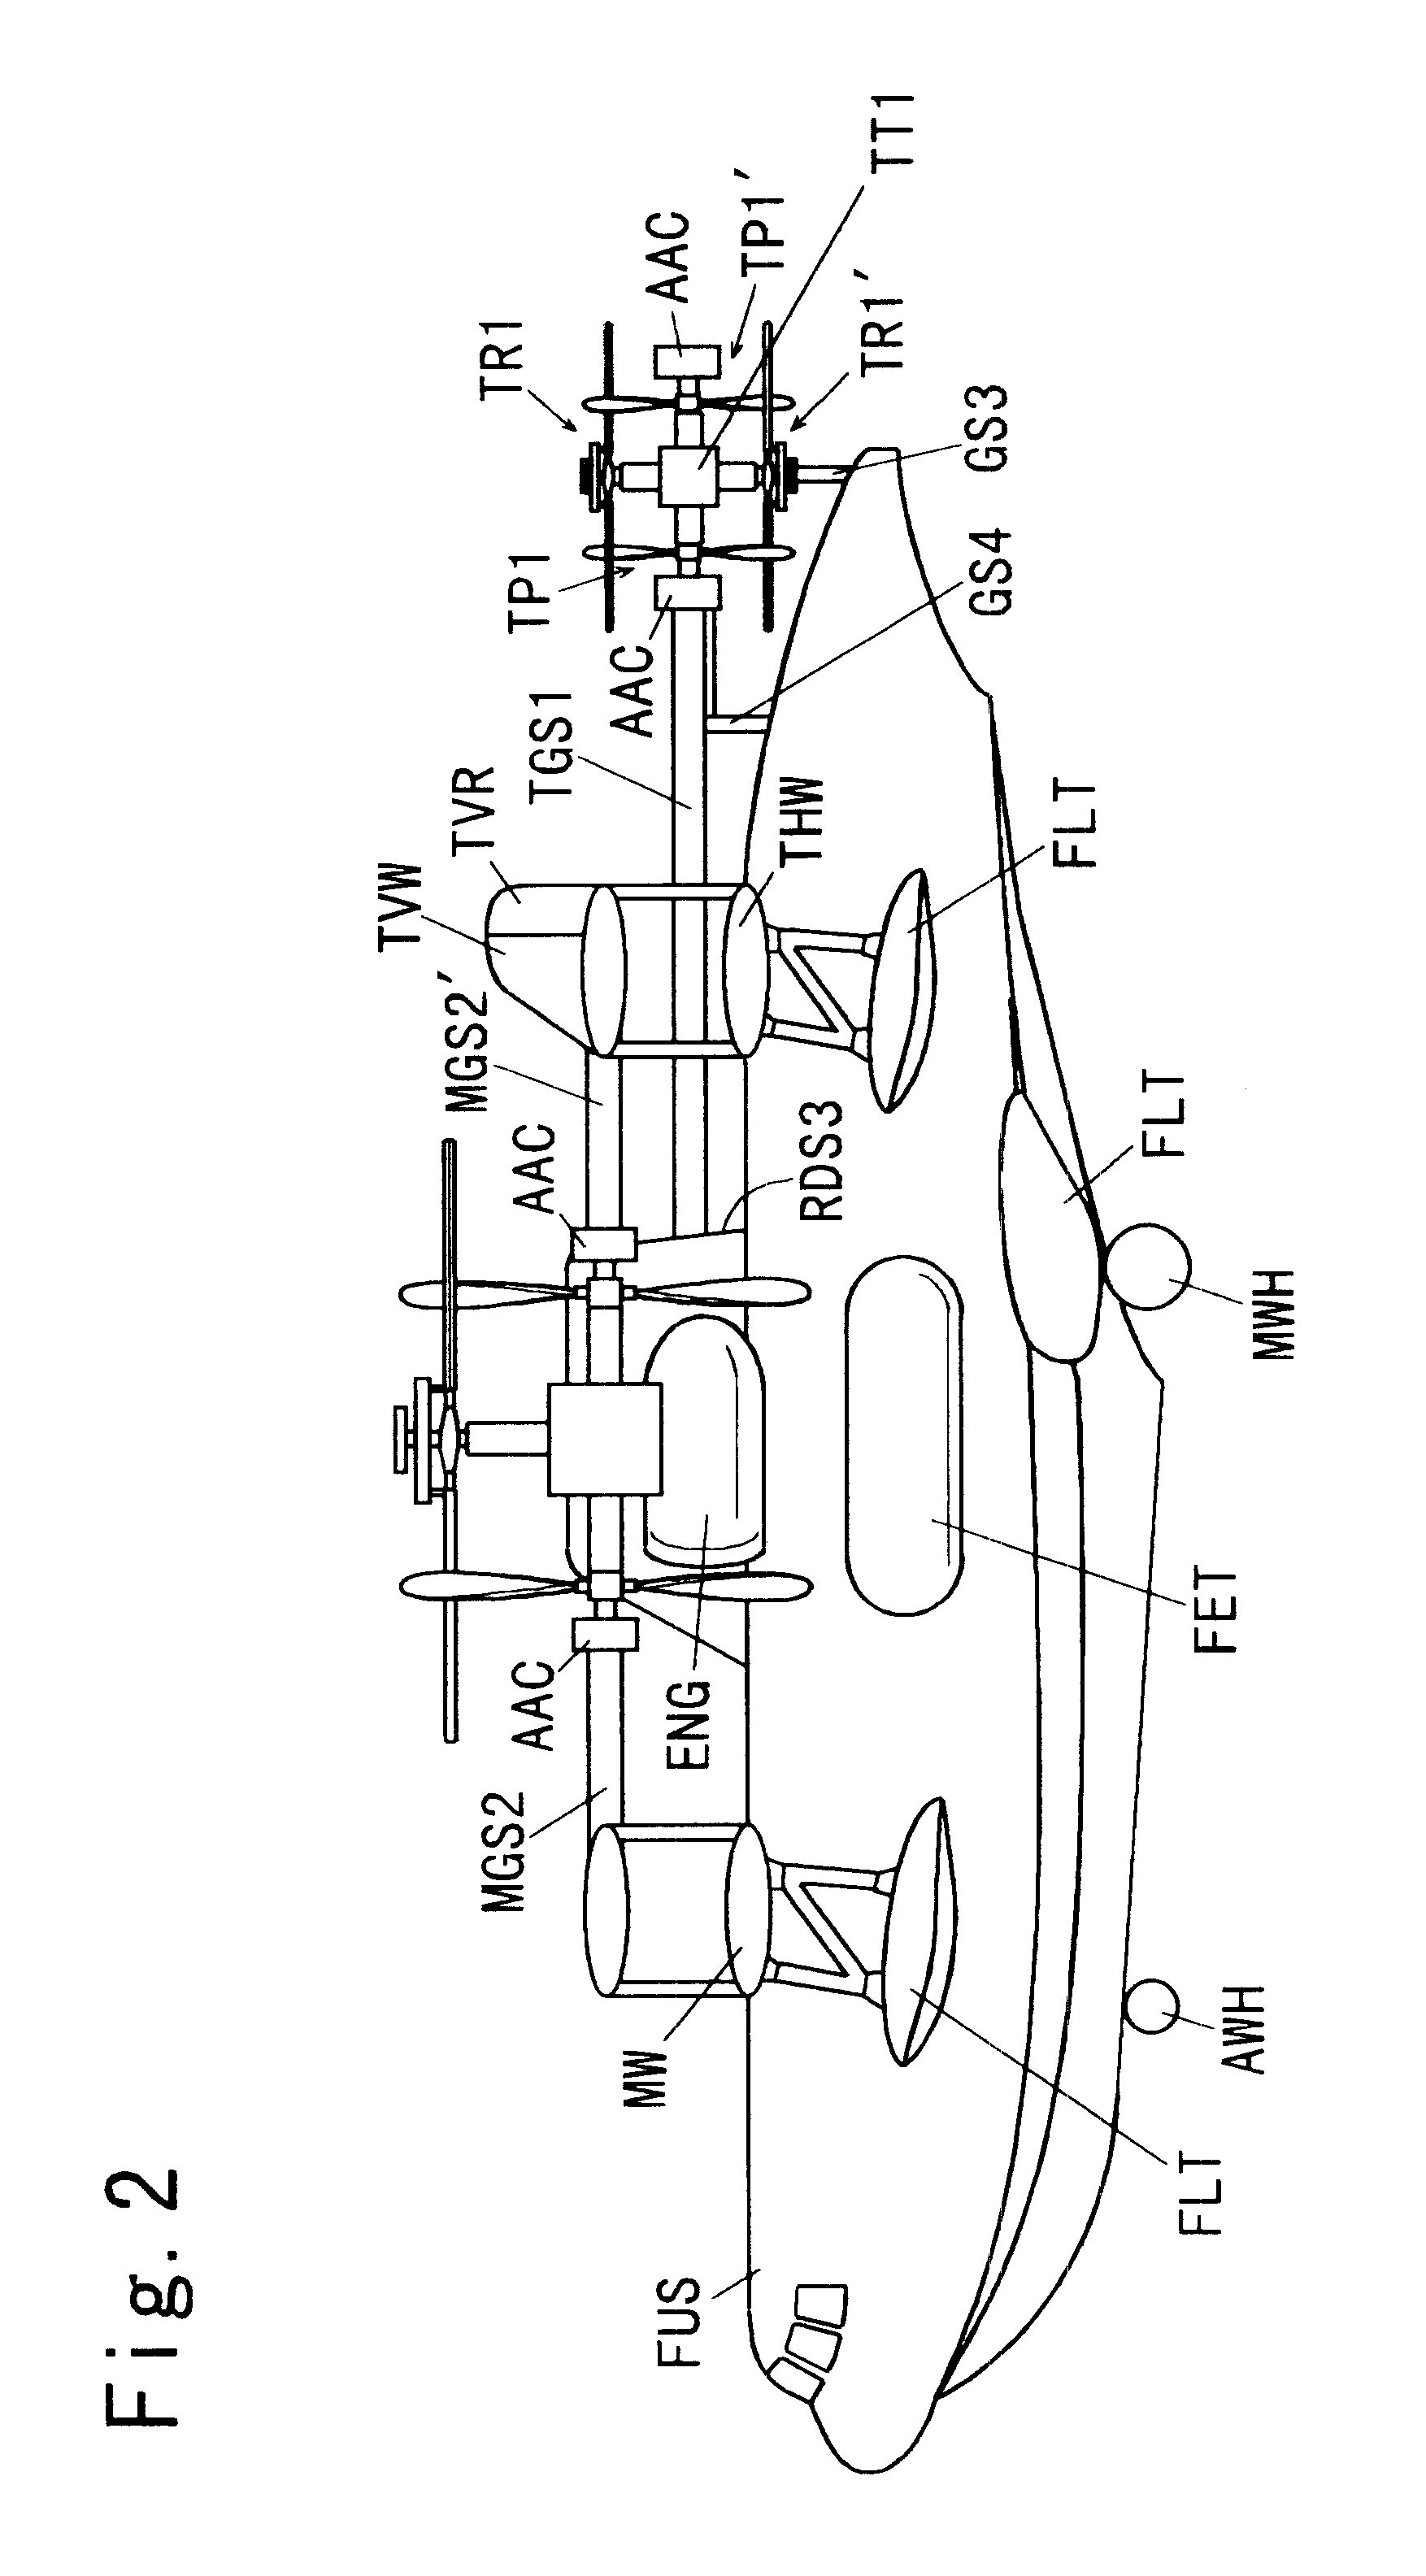 Aircraft and torque transmission